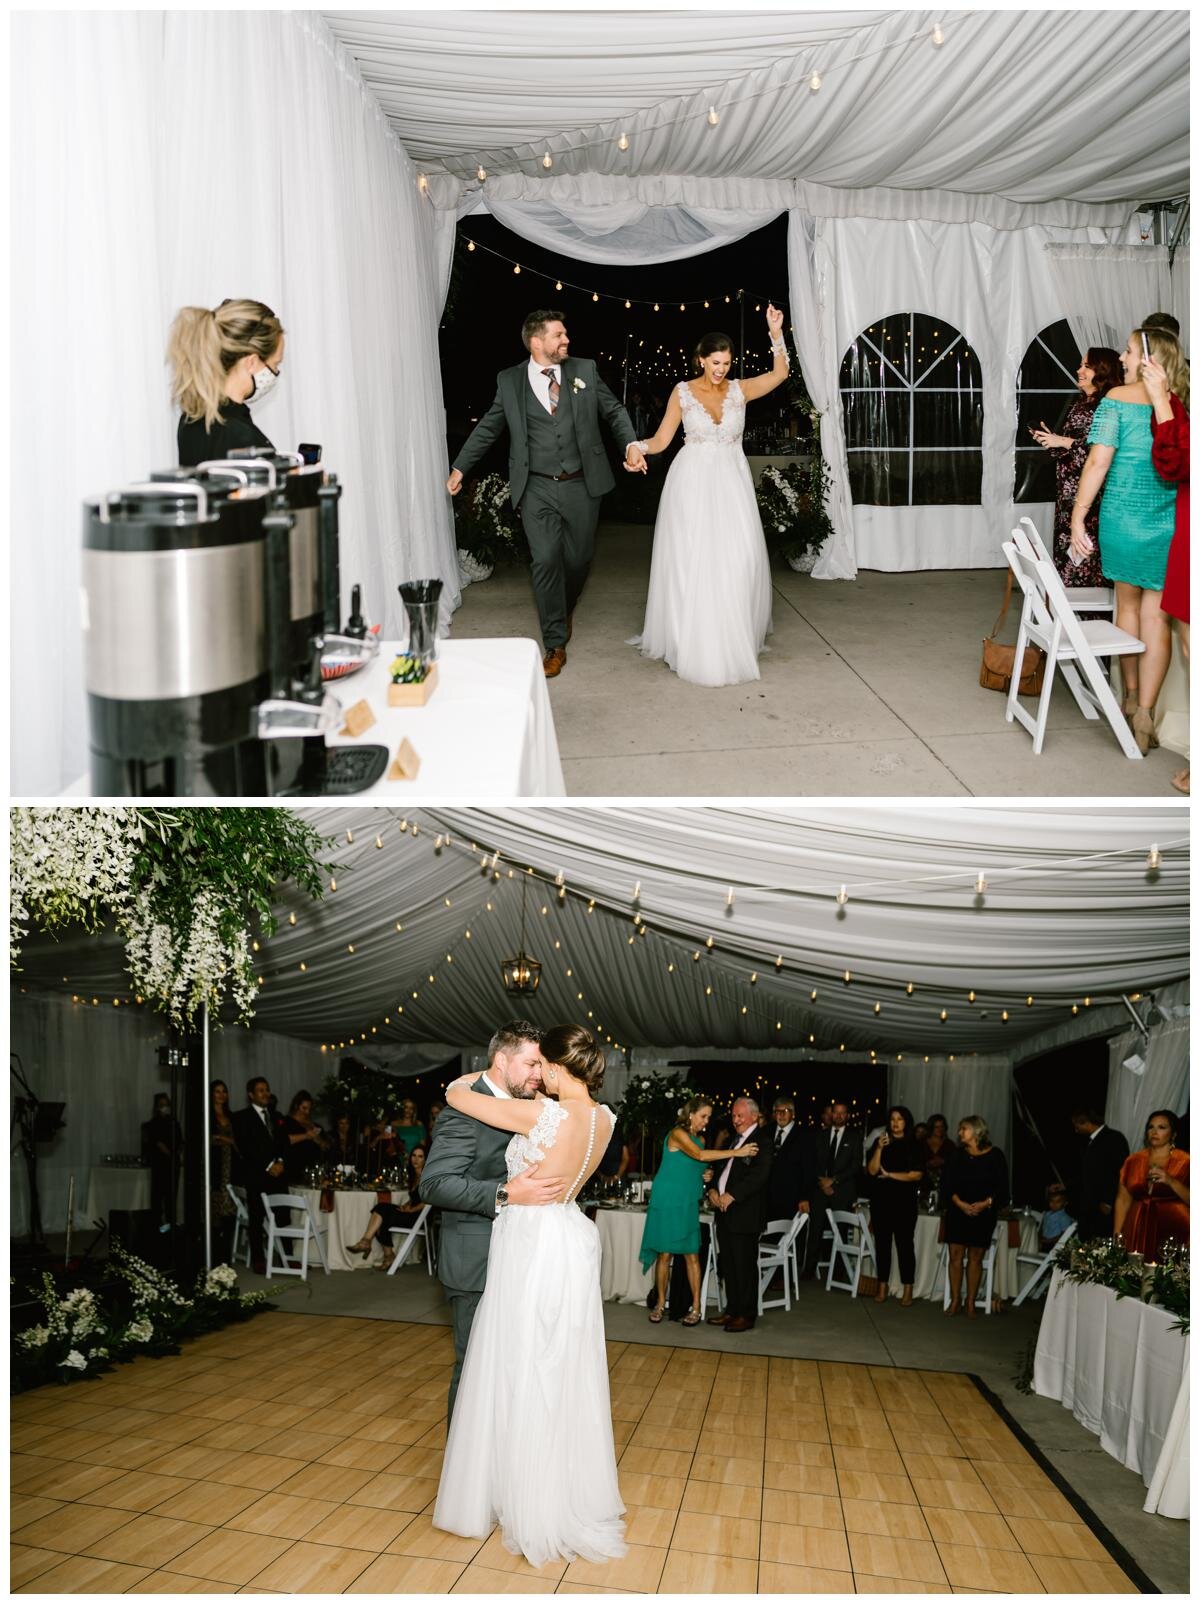  The couple was greeted with enthusiastic applause before immediately launching into their first dance as husband and wife. 